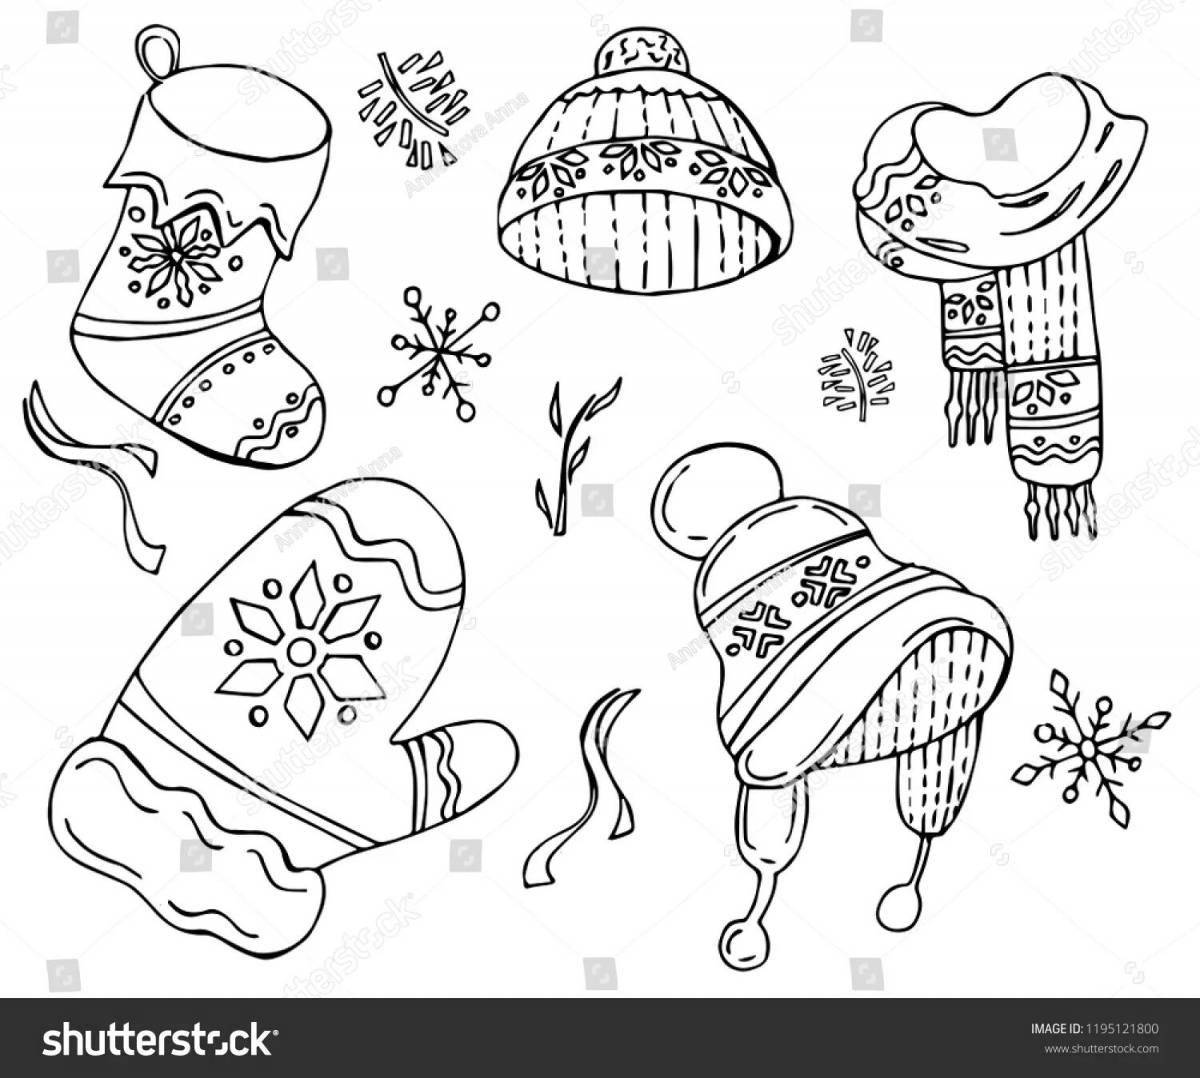 Fun coloring book for kids with mittens and hats